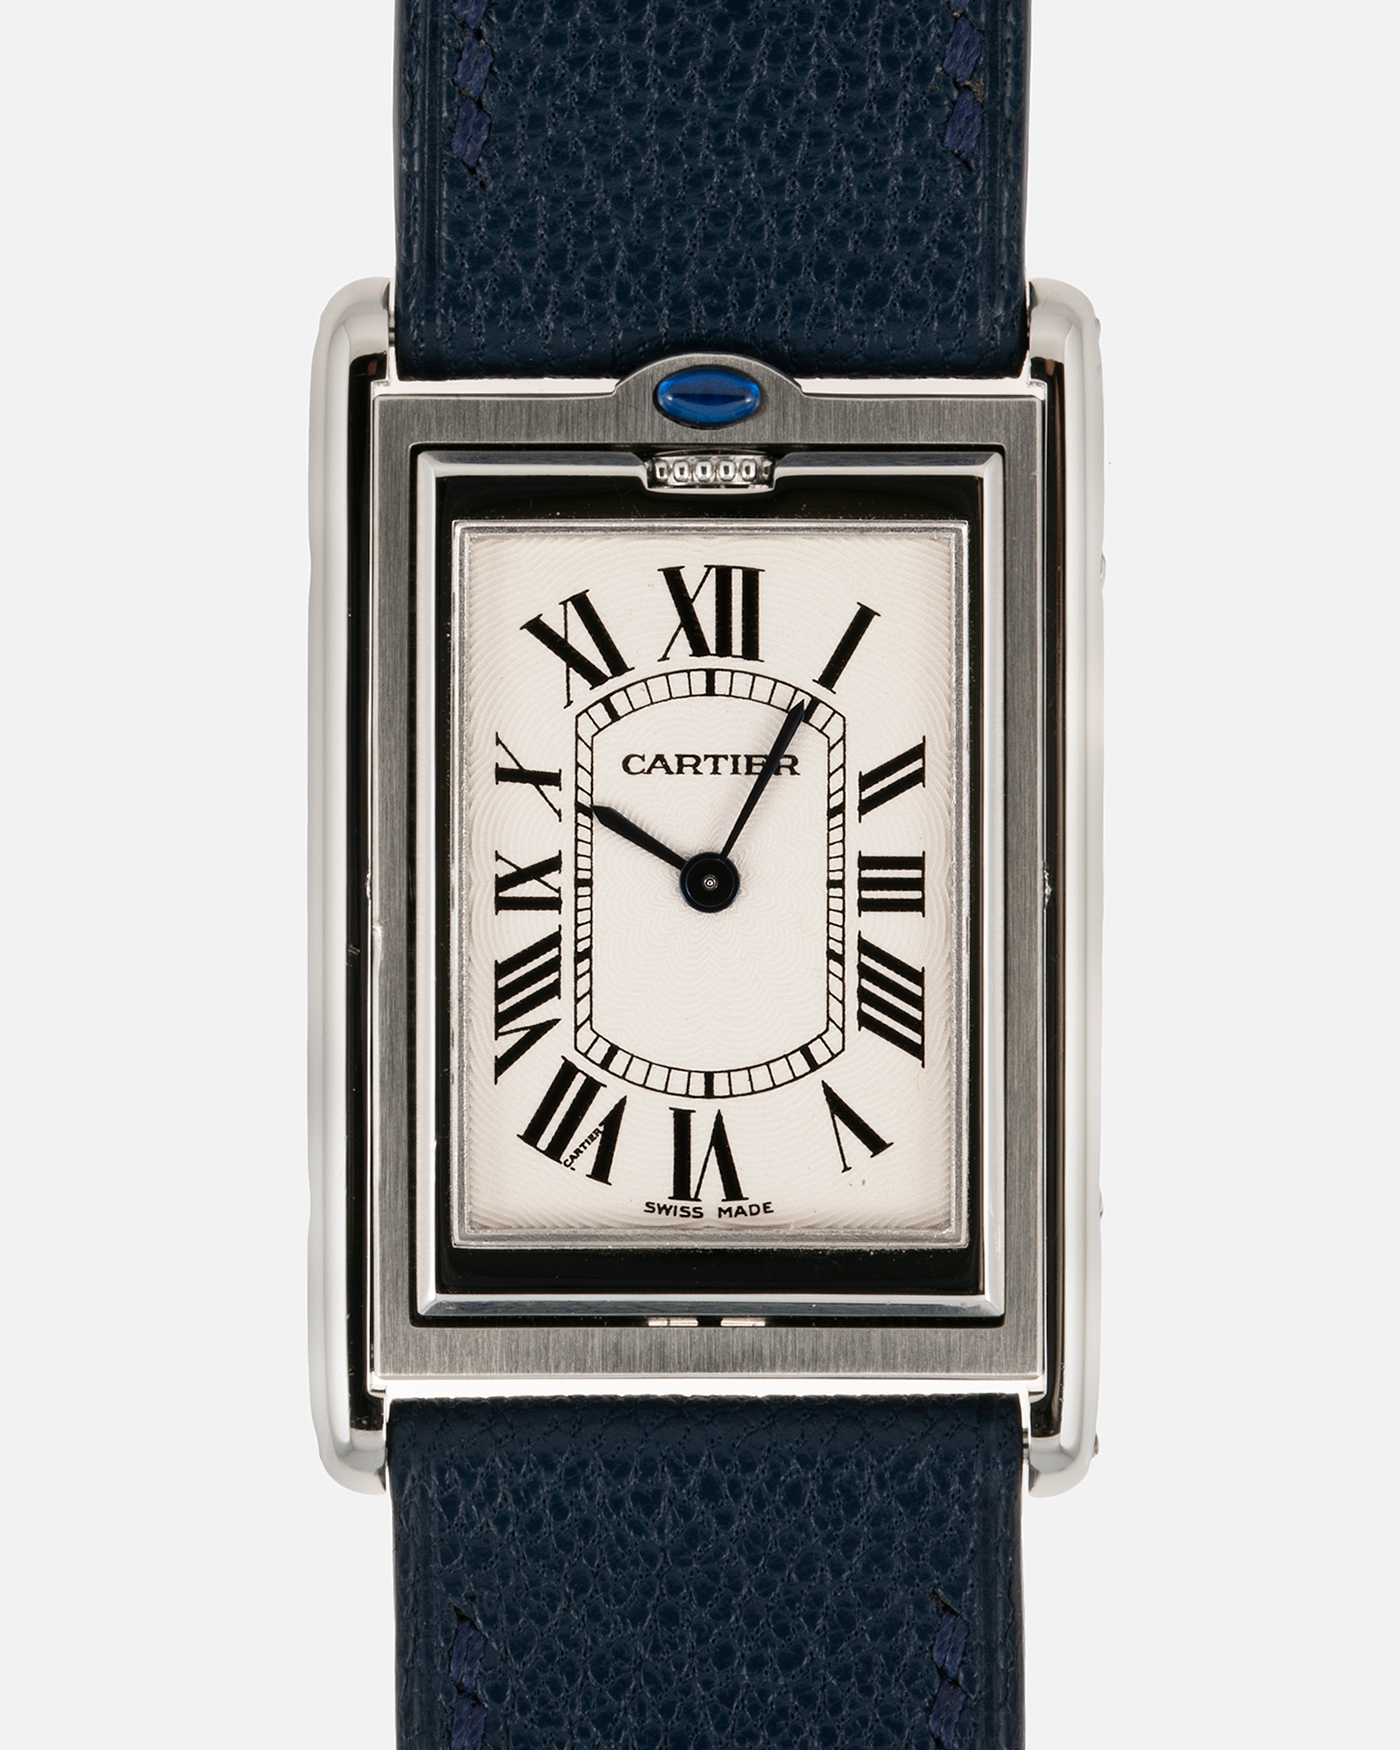 Brand: Cartier Year: 1990’s Model: Tank Basculante Reference: 2390 Material: Stainless Steel Movement: Piguet-derived Cartier Cal. 050 MC, Manual-Winding Case Diameter: 26mm x 38mm Strap: Alexandre Ritz Navy Blue Calf Leather Strap with Signed Stainless Steel Tang Buckle